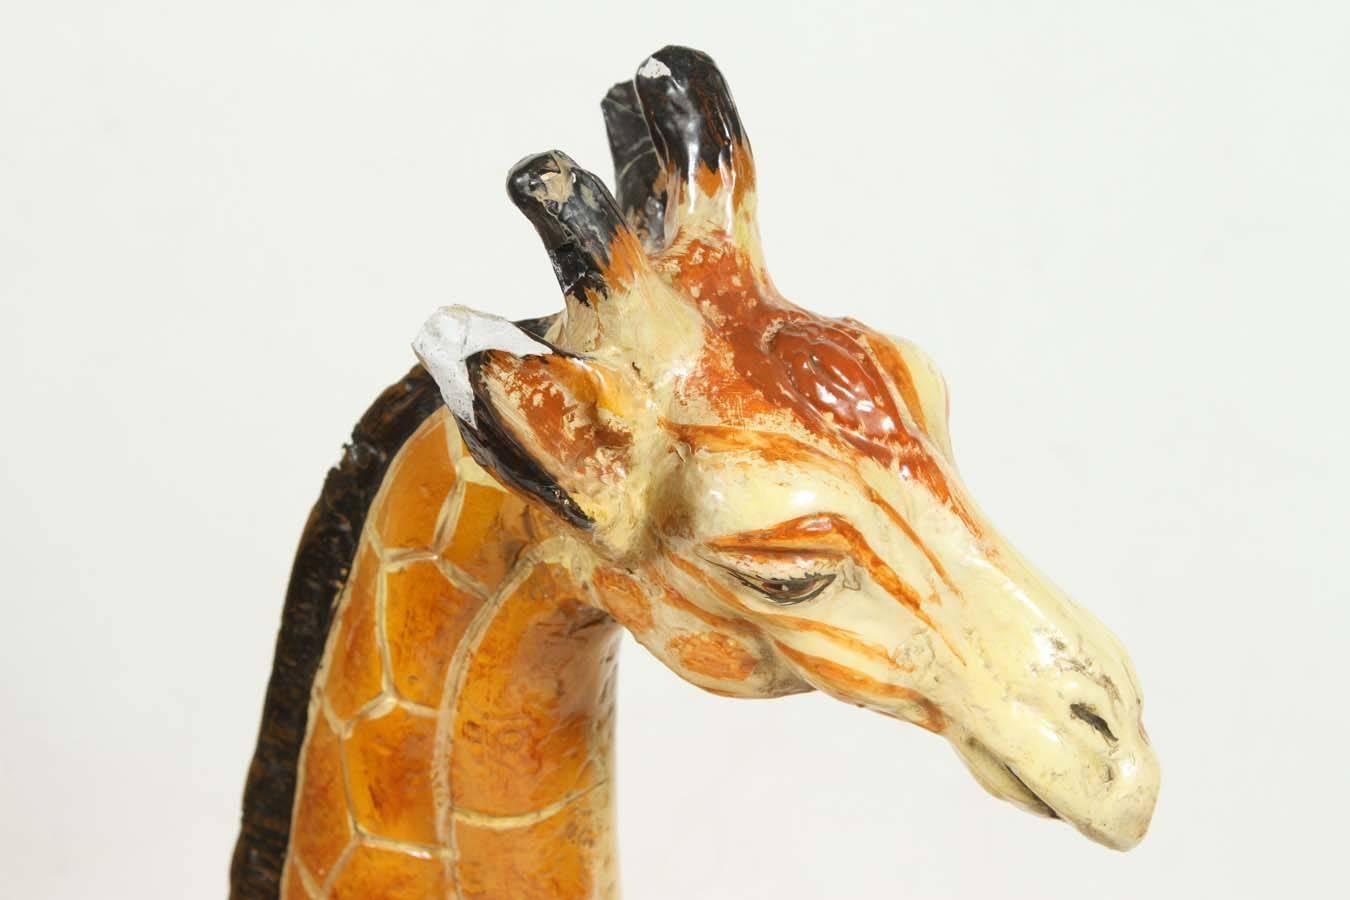 Hand-painted and glazed ceramic giraffe figurine from the 1960s.